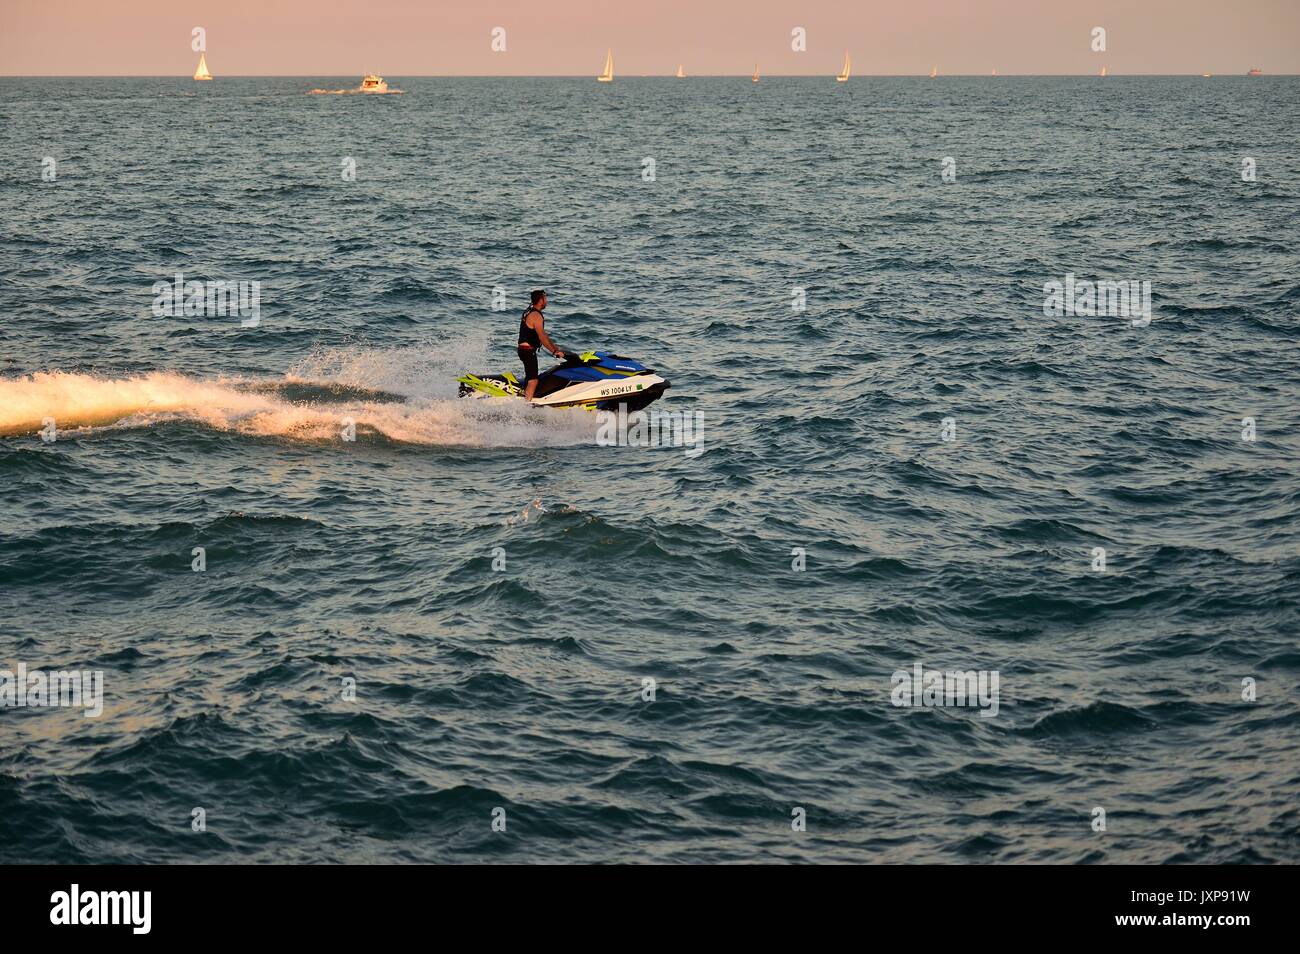 Man piloting a watercraft on Lake Michigan just outside Chicago's Diversey Harbor. Chicago, Illinois, USA. Stock Photo